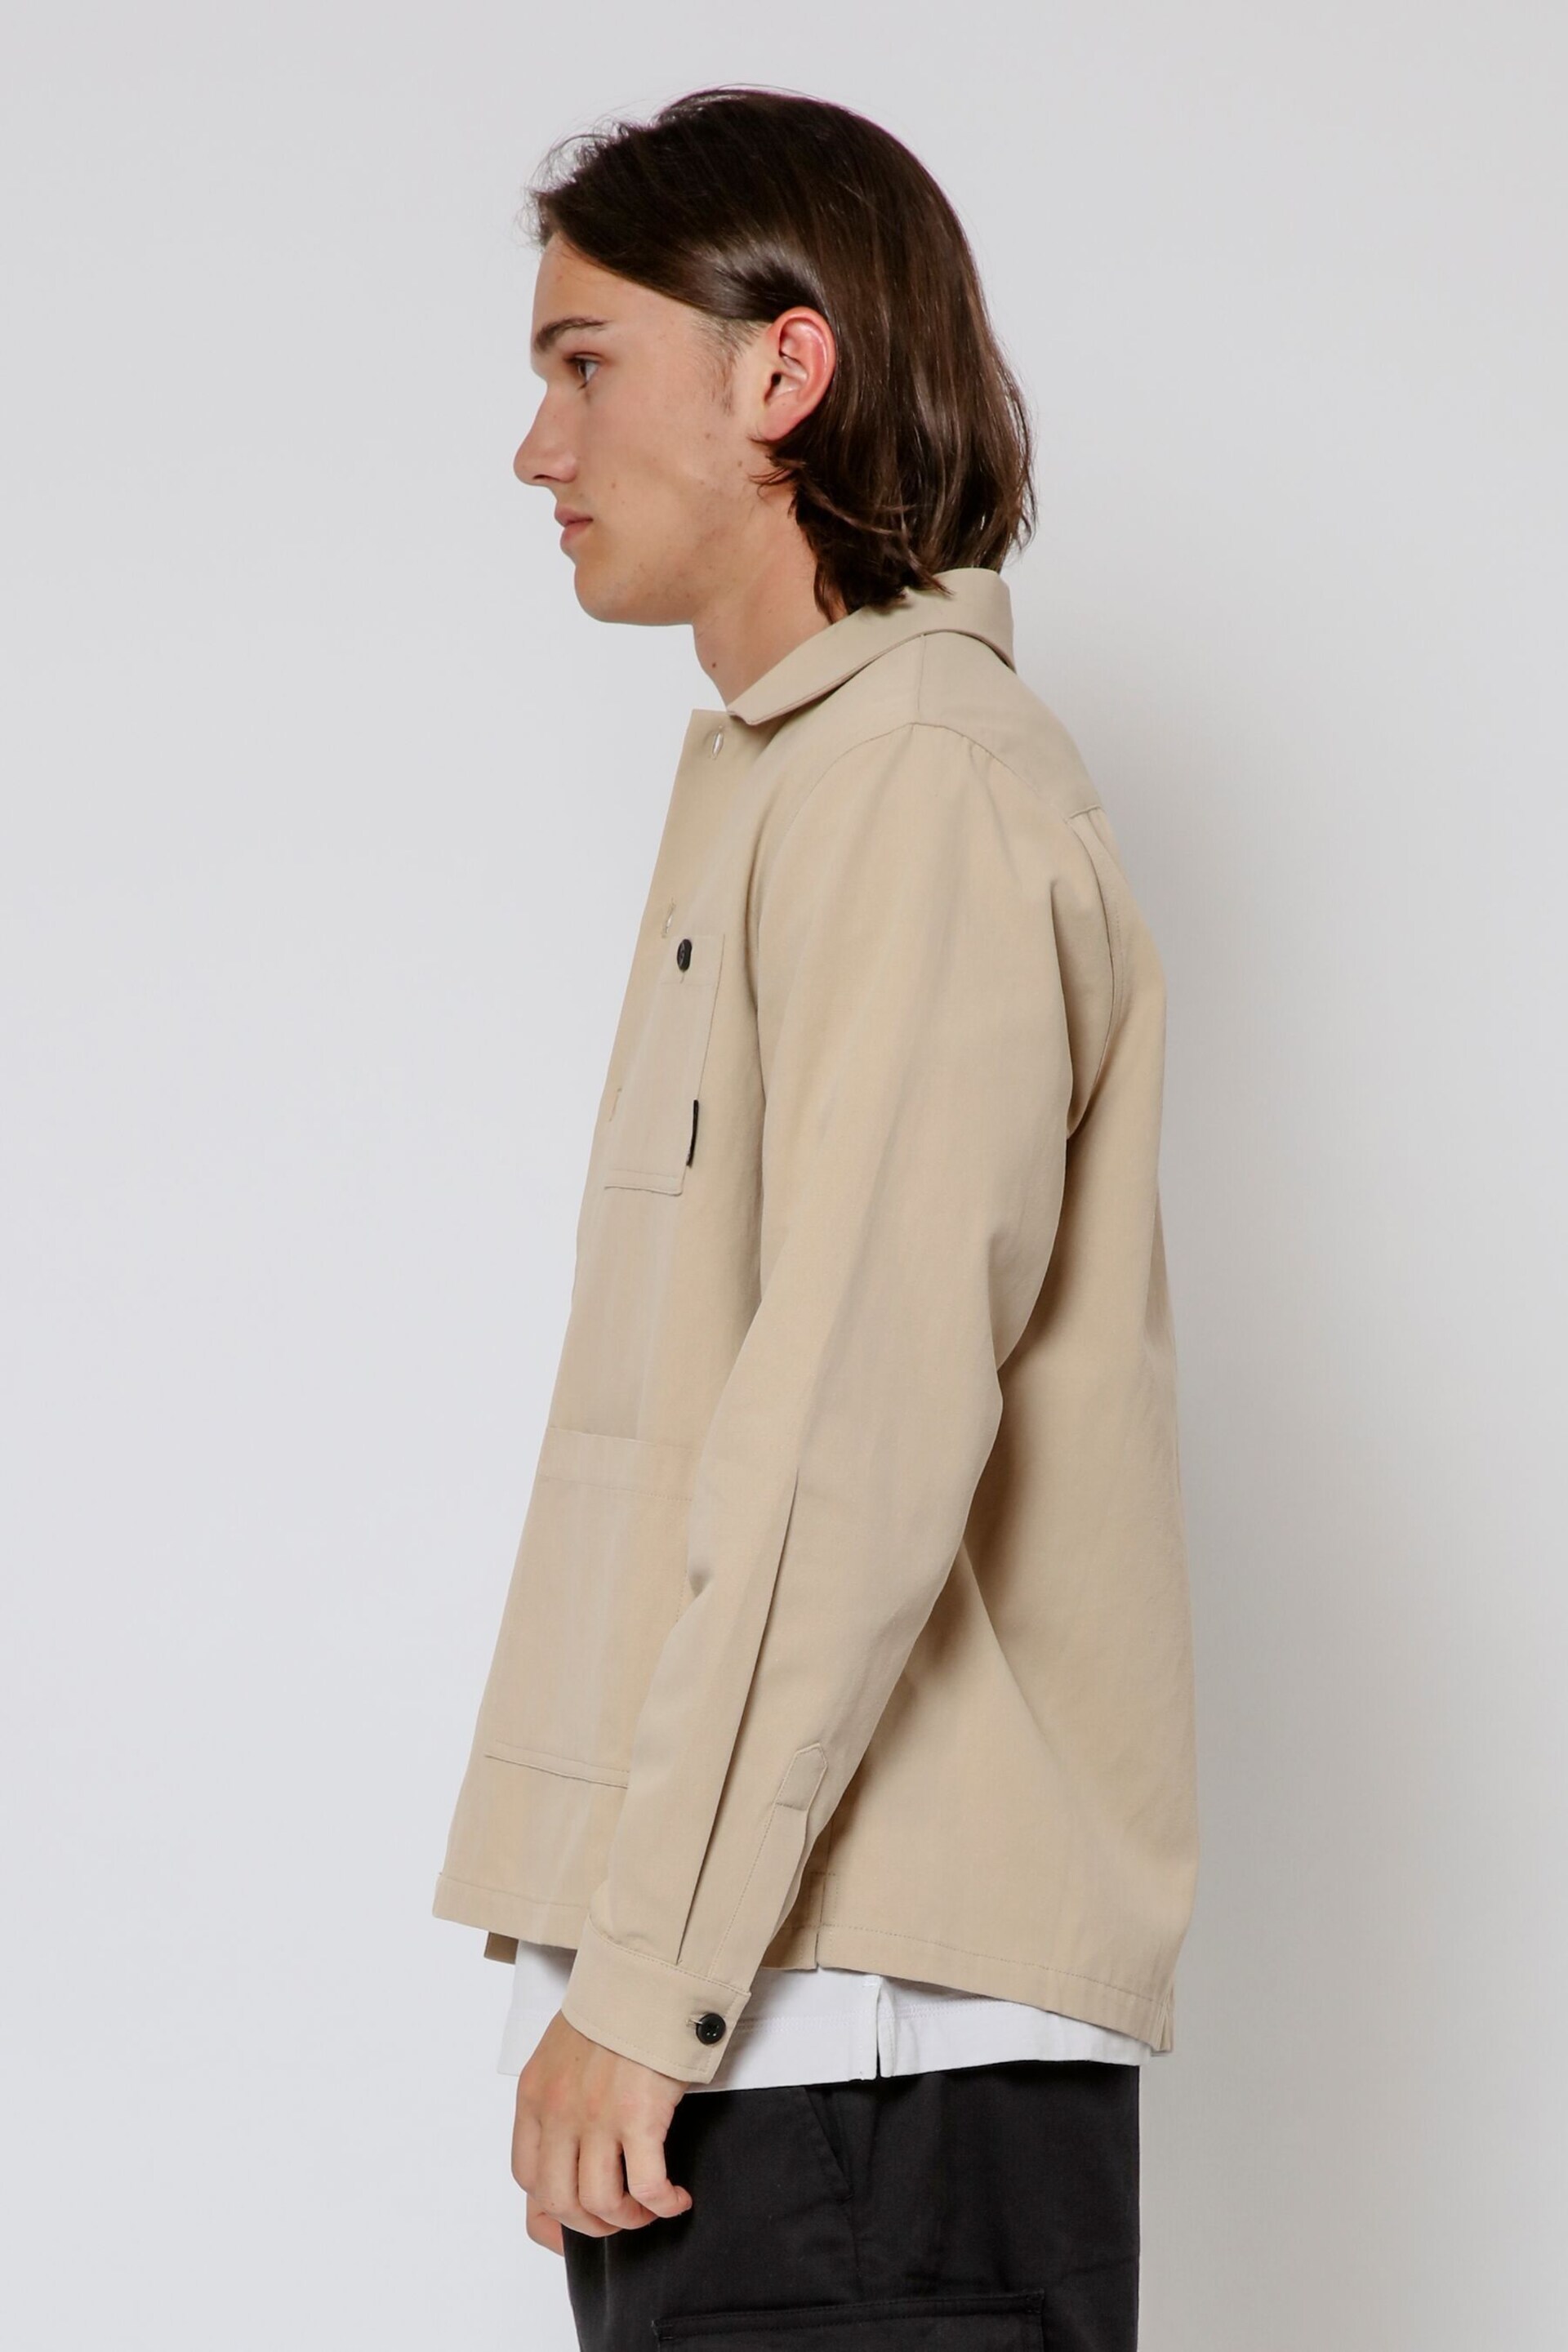 Religion Brown Button Up Drill Overshirt - Image 3 of 4